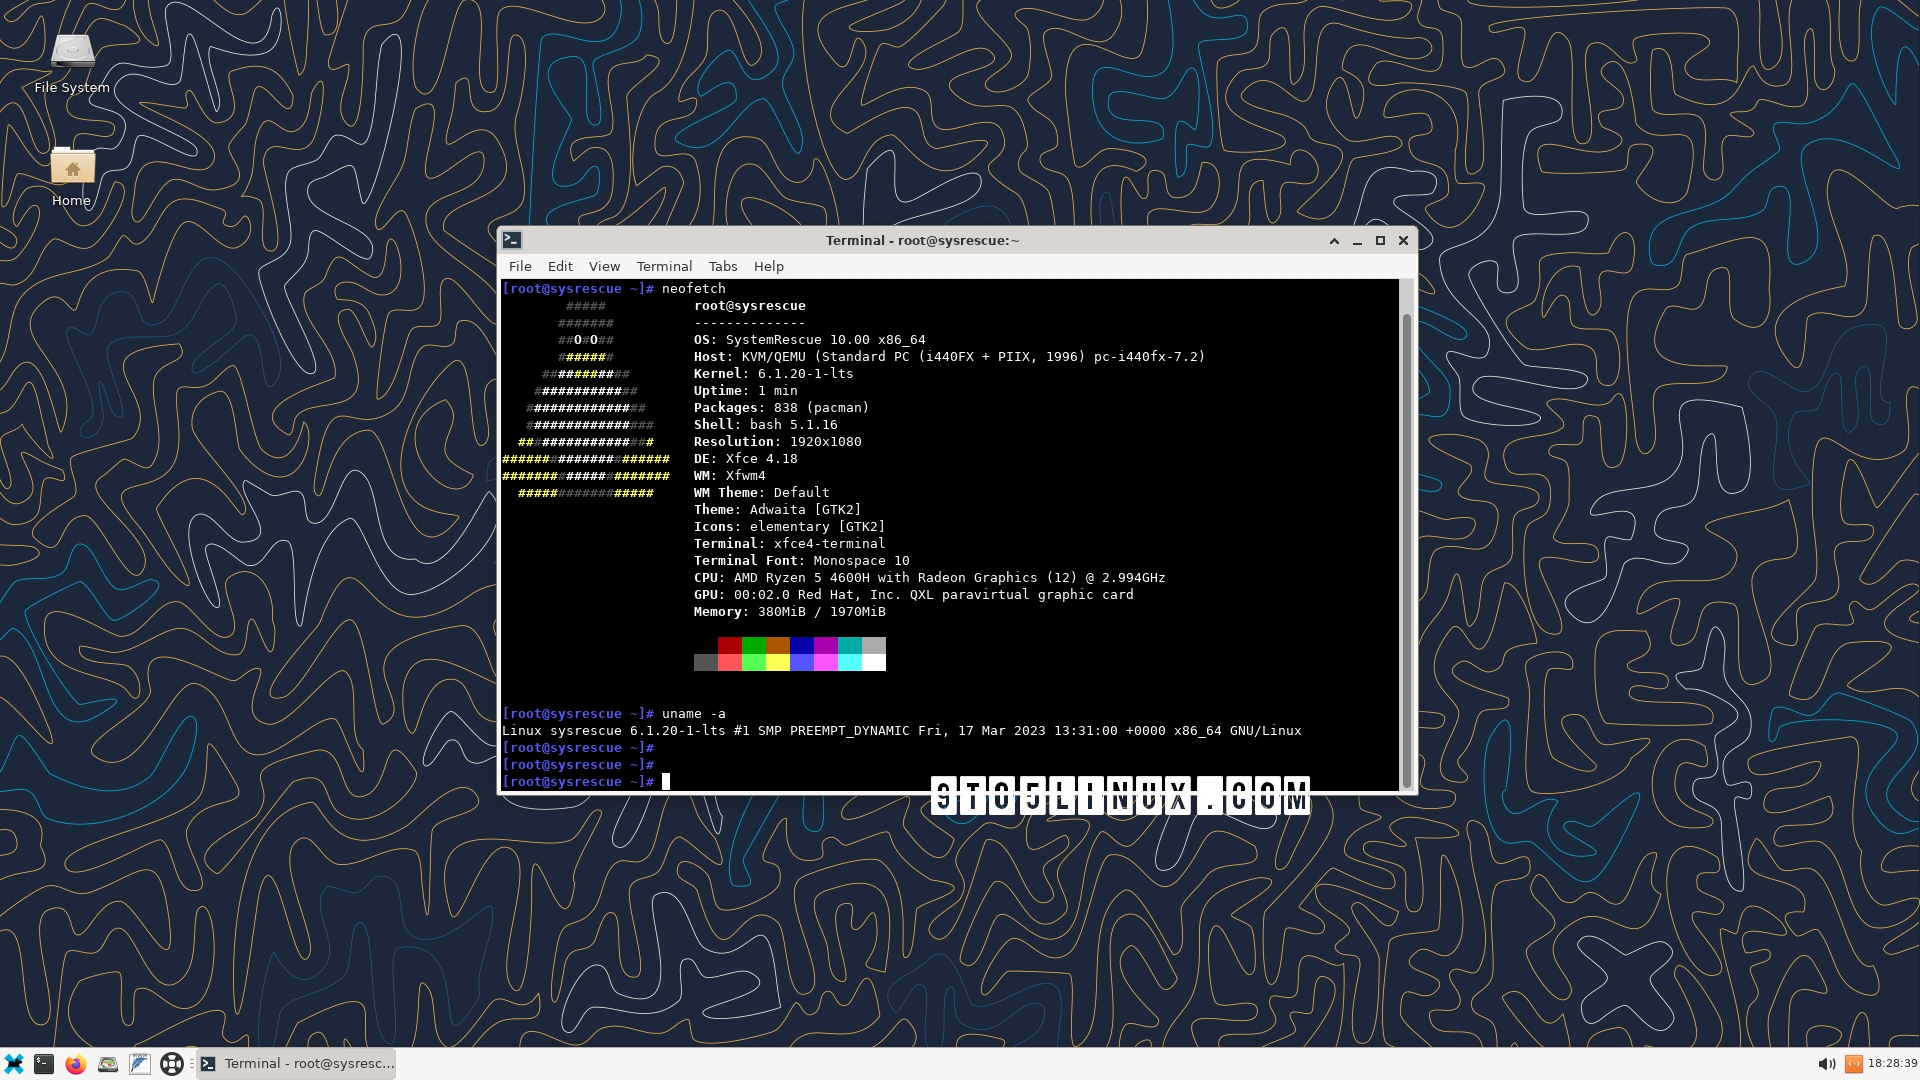 Arch Linux-Based SystemRescue 10 Released with Linux Kernel 6.1 LTS